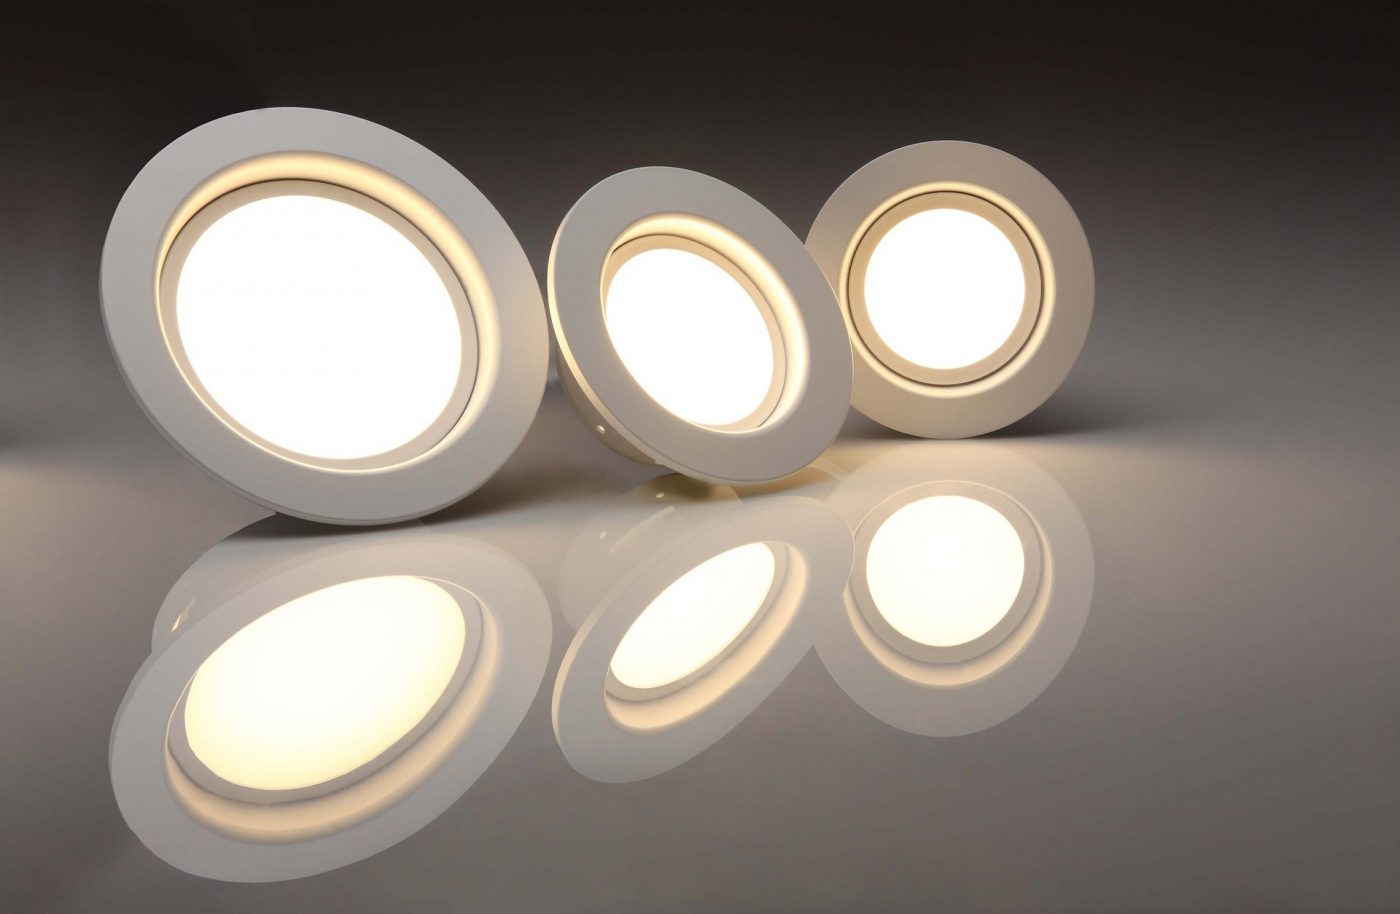 Vietnam: Safety and EMC Requirements for LED Lamps